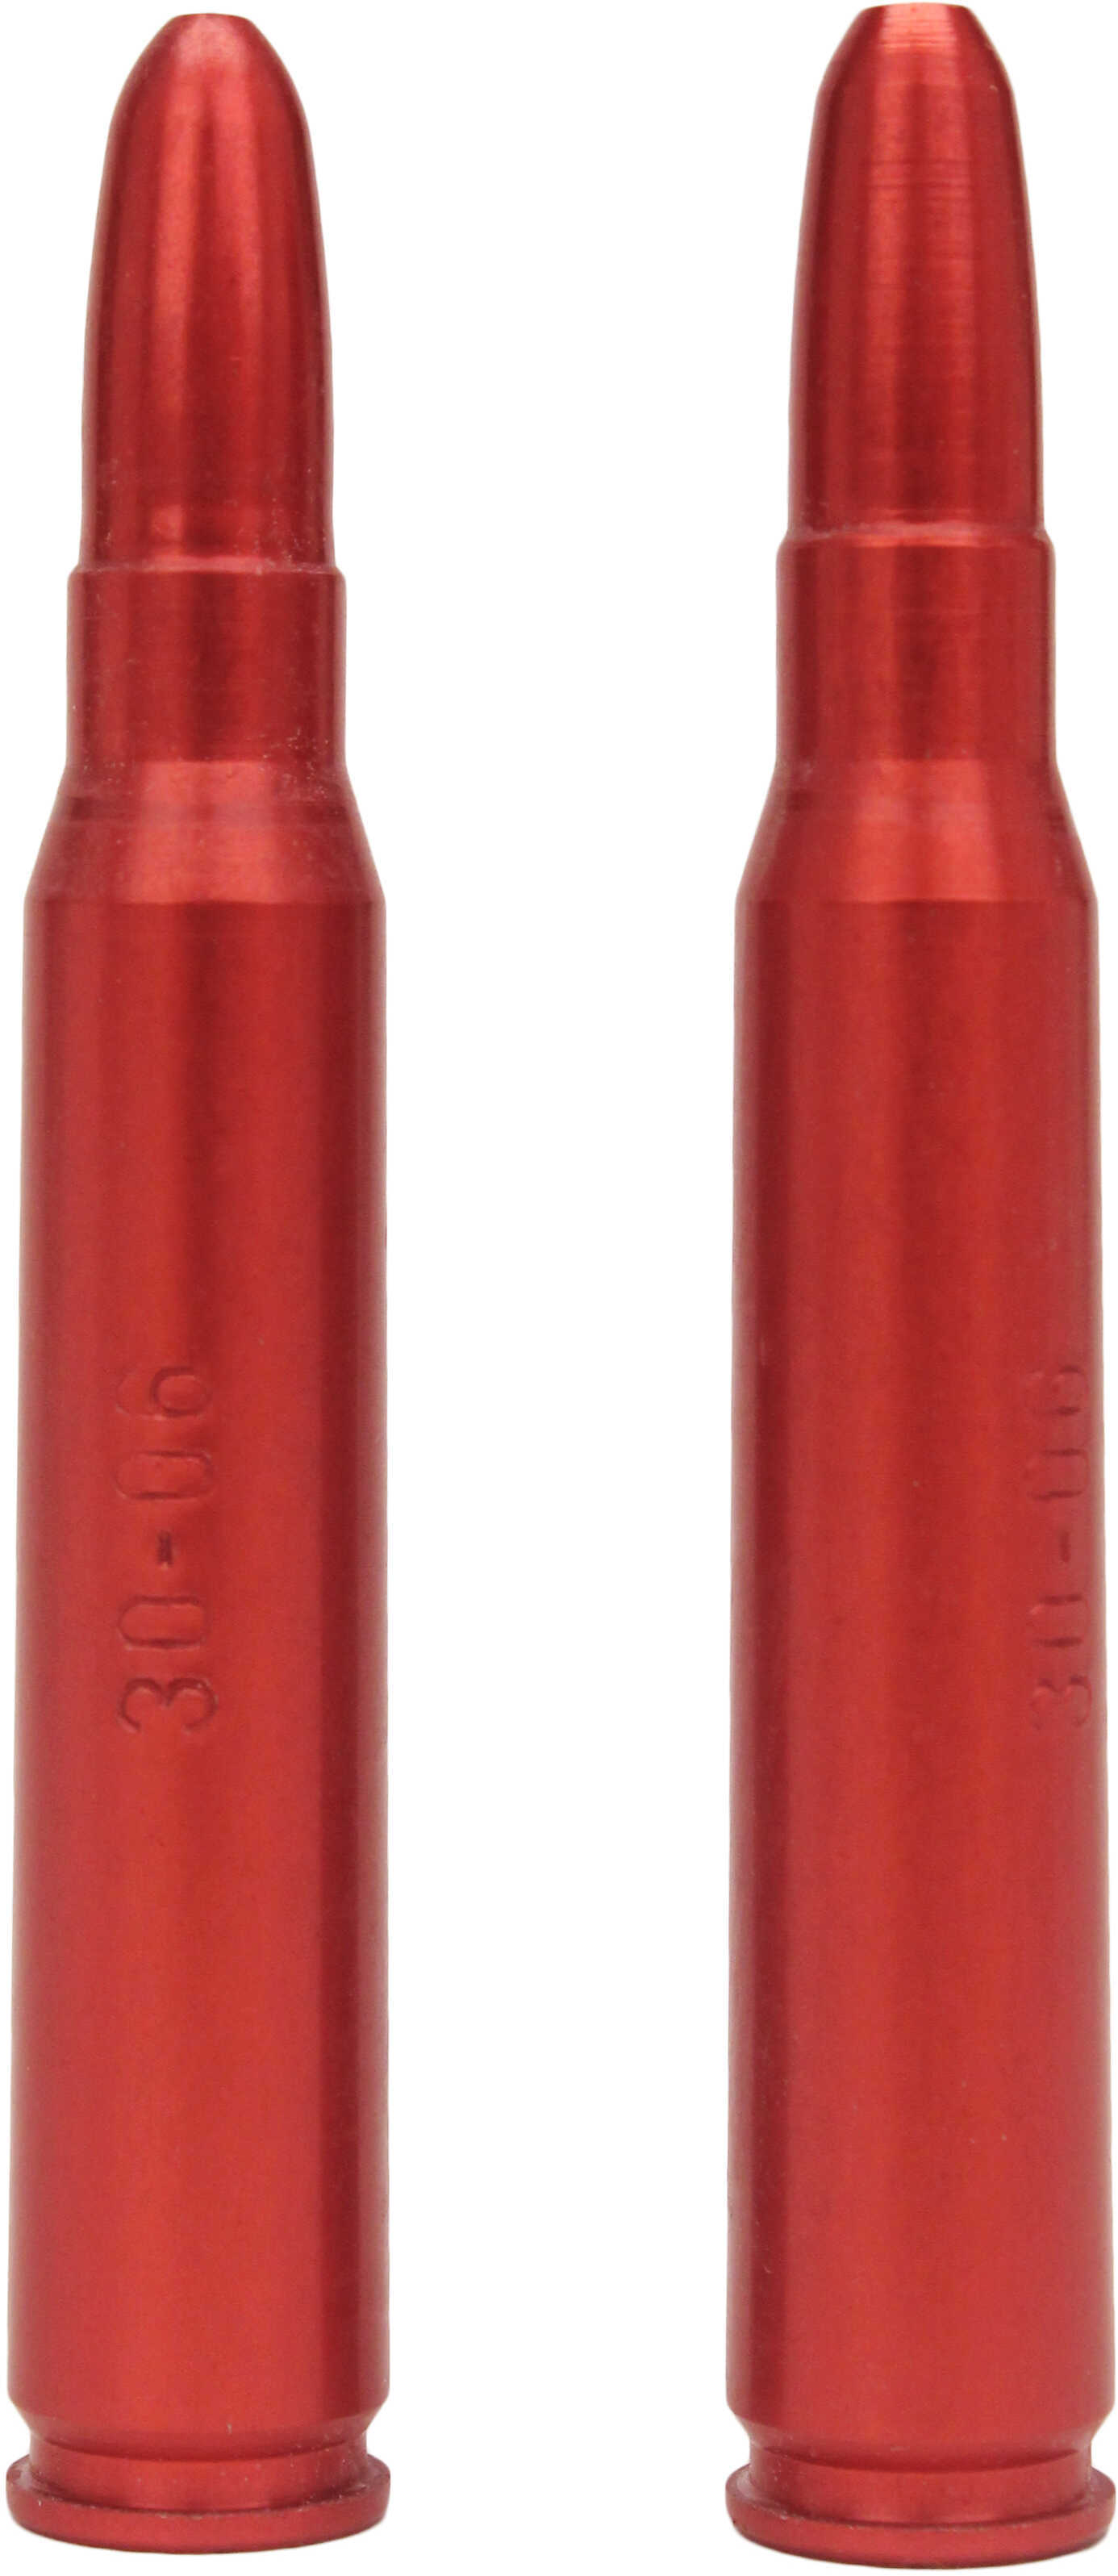 Carlson's Snap Cap 30-06 Springfield (2 Pack) Md: 00055